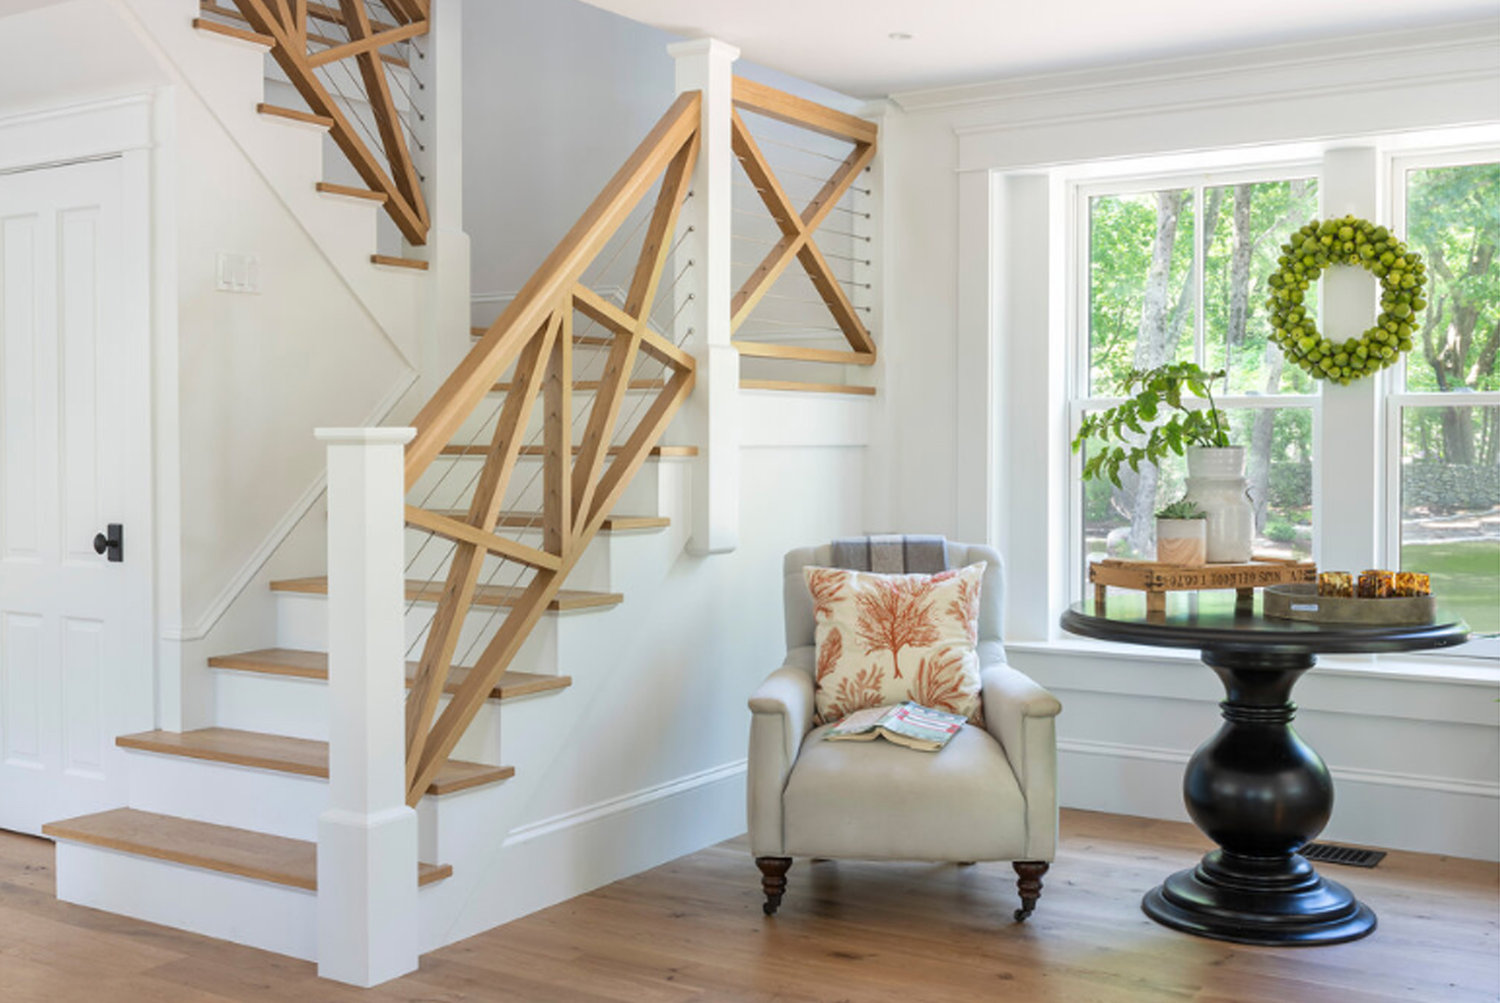 An oak cross buck design with steel cable creates a beautiful – and safe – stairway design